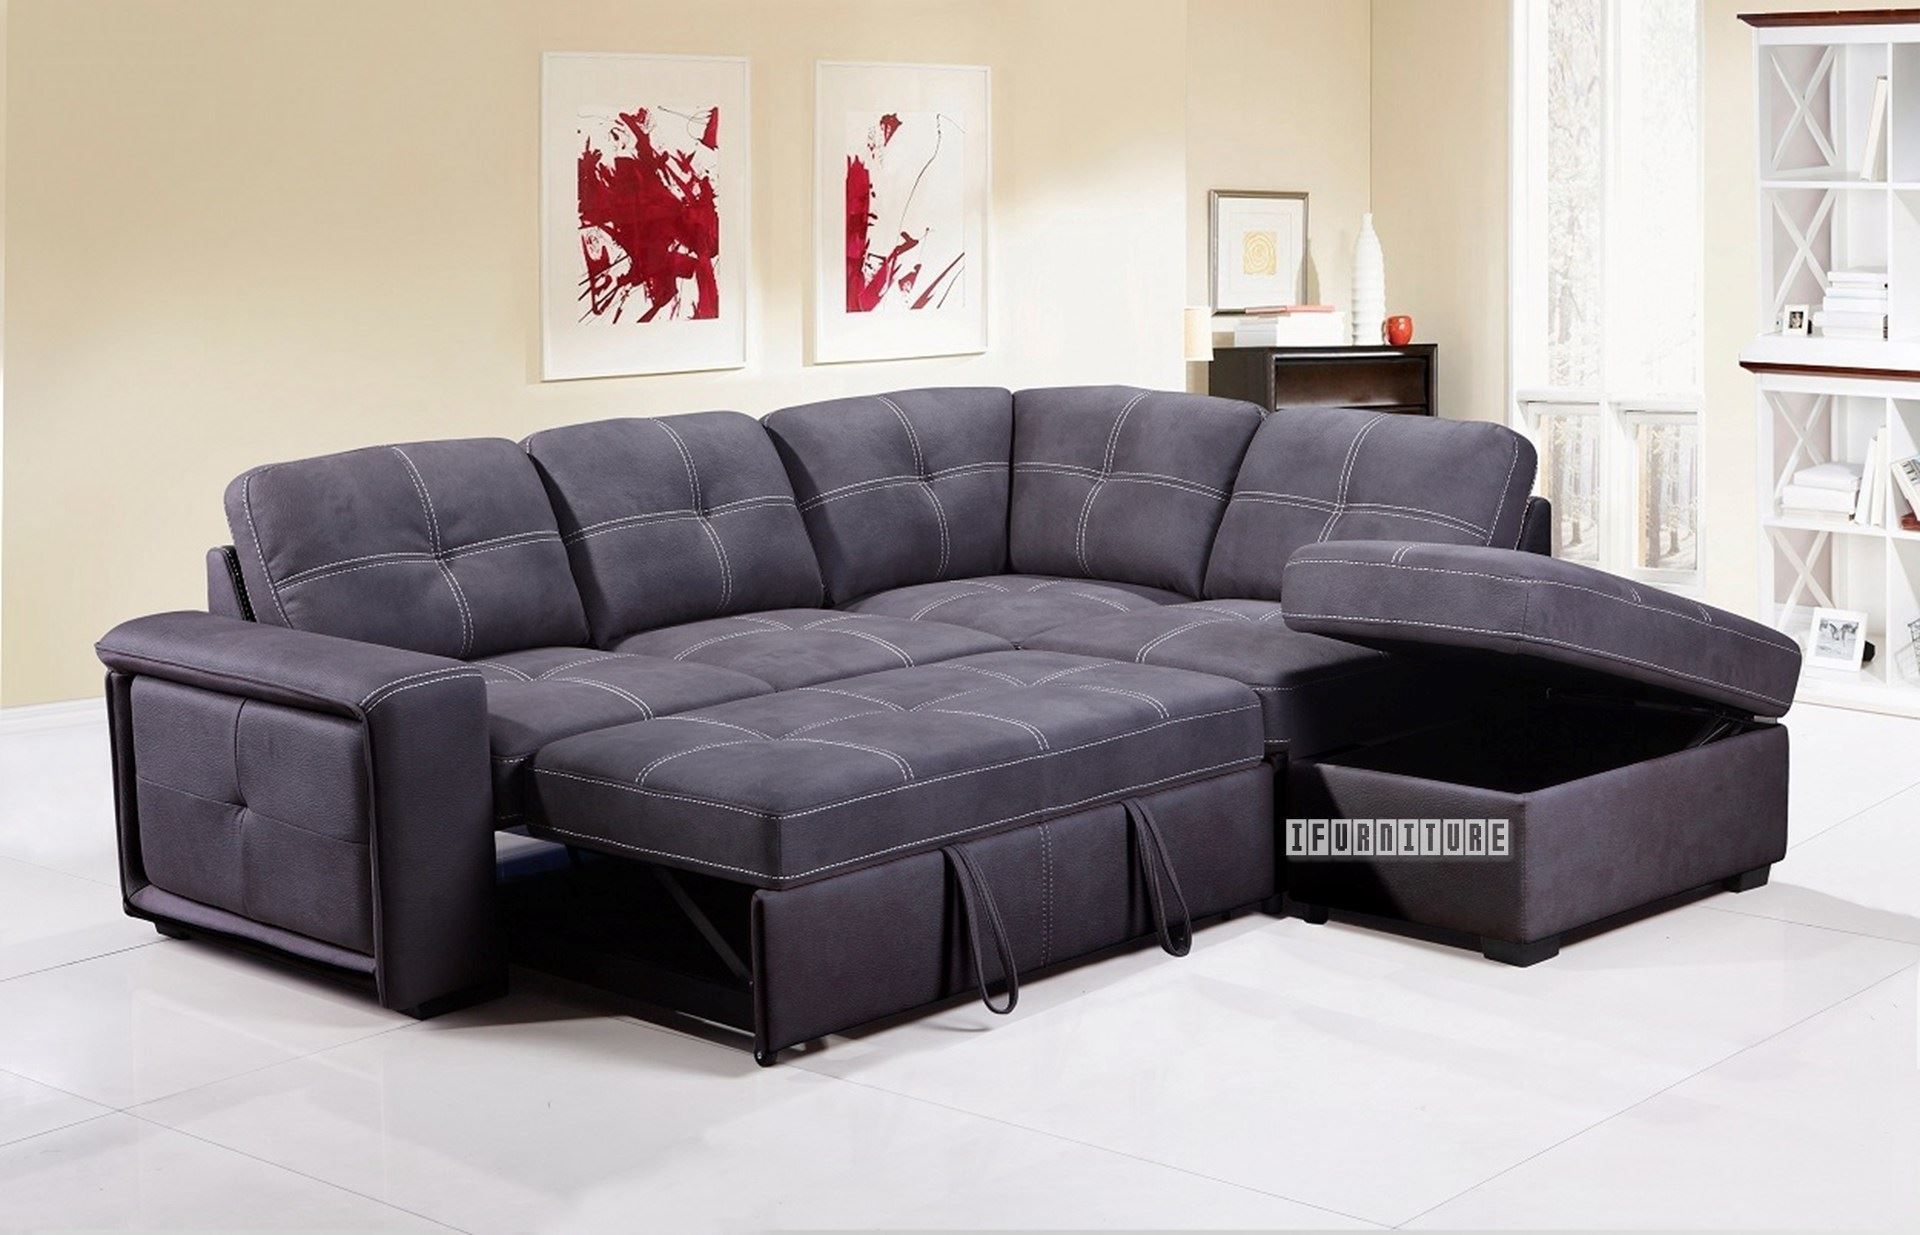 Bellini Sectional Sofa Bed With Storage *Grey Throughout Celine Sectional Futon Sofas With Storage Reclining Couch (View 6 of 15)